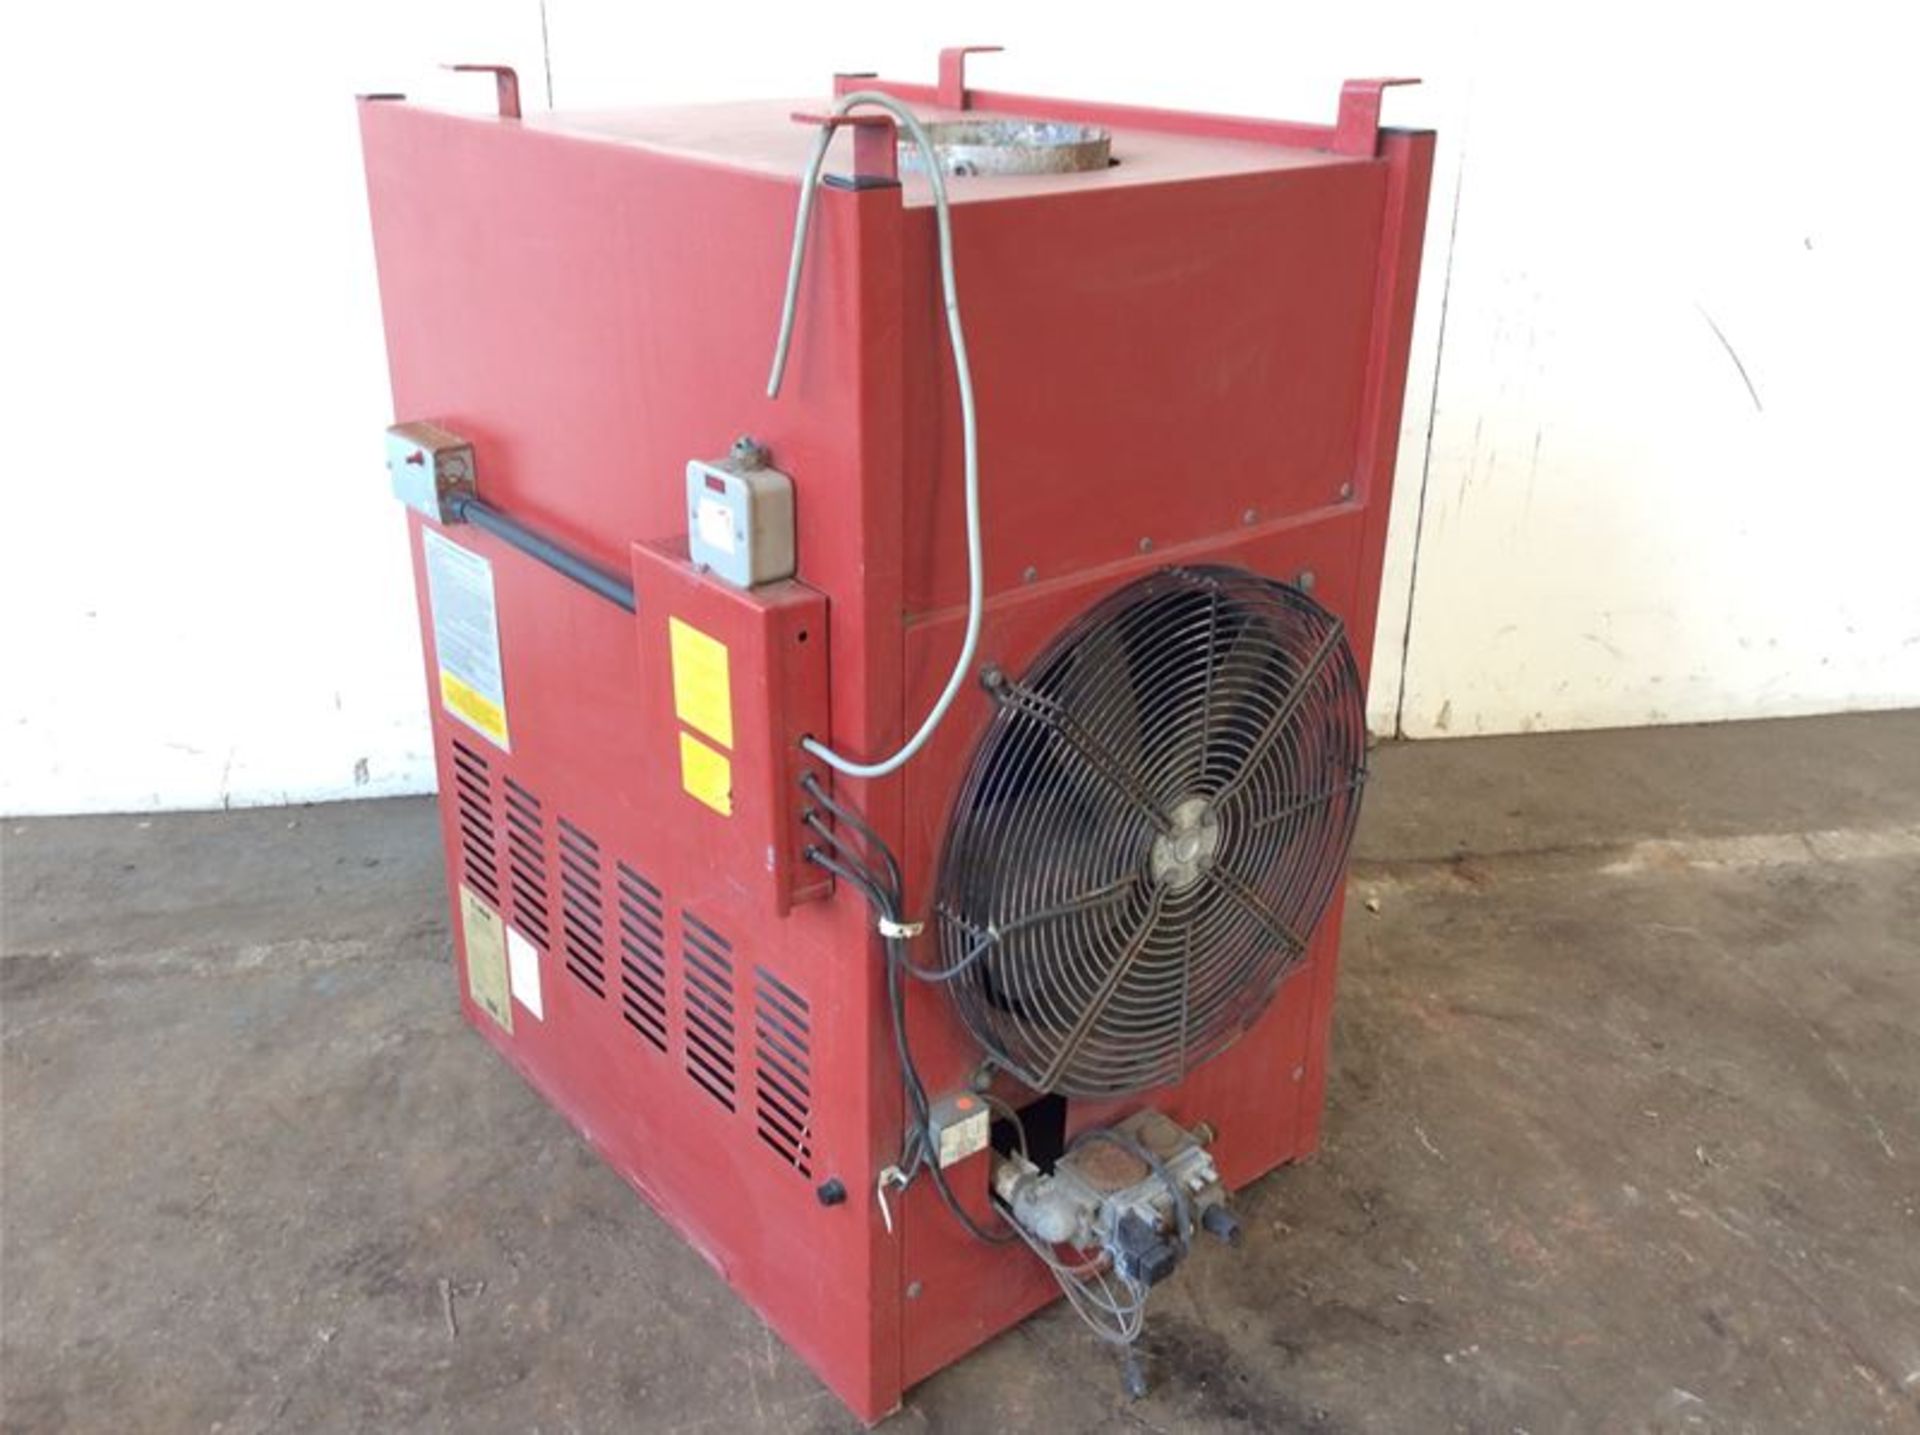 COMBAT CUHA 120 NATURAL GAS FIRED AIR SPACE HEATER - 33KW - Image 2 of 4